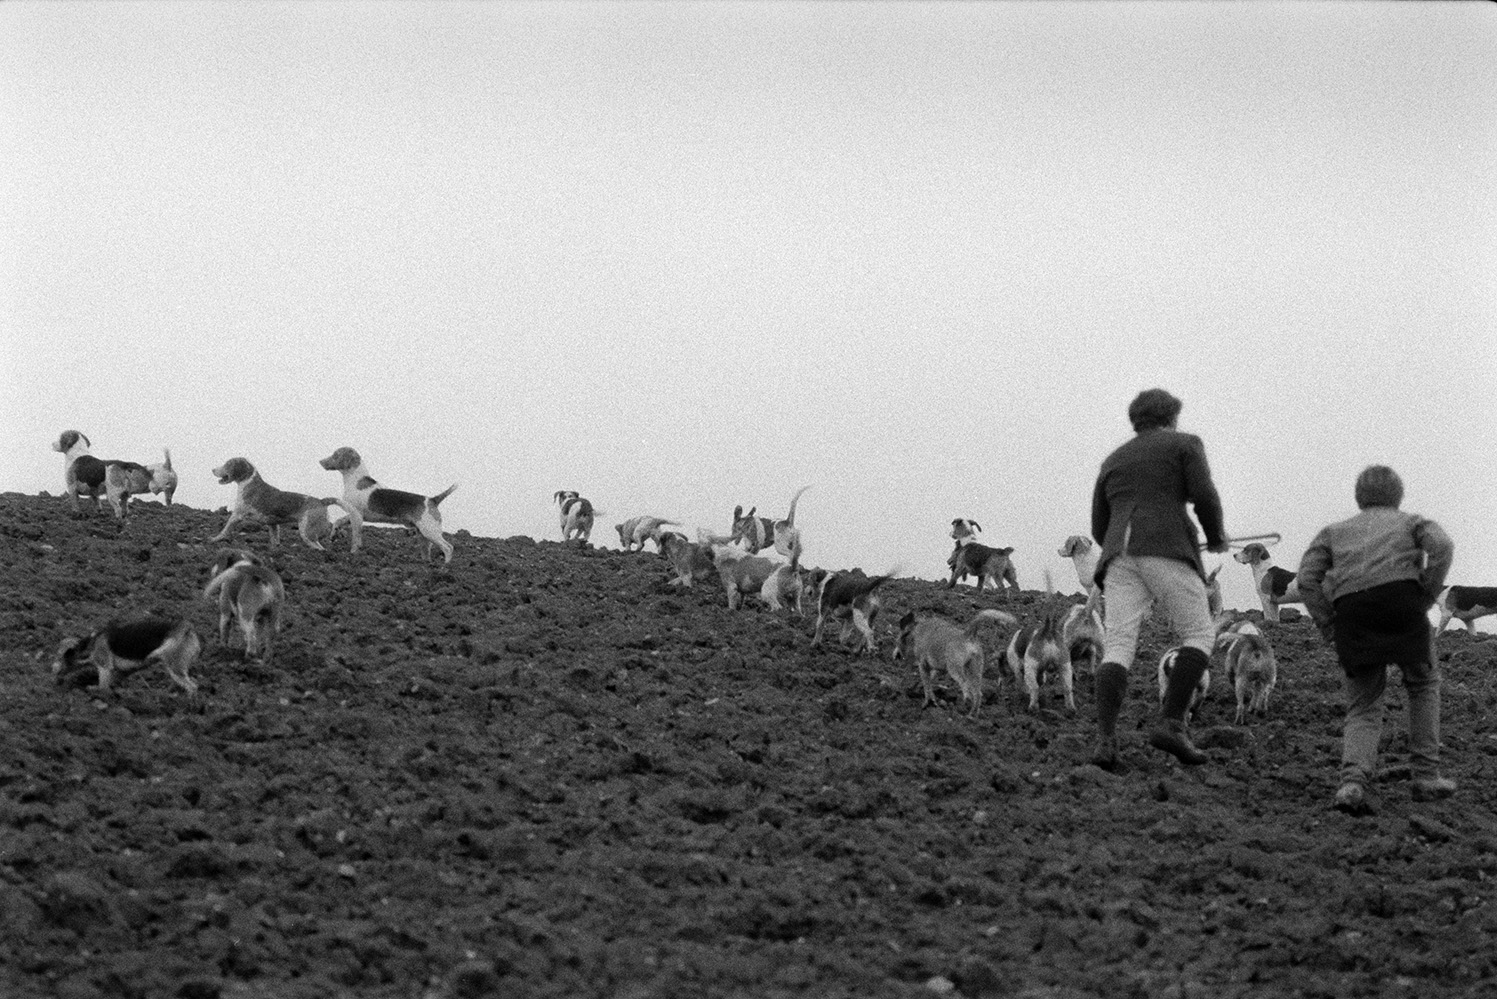 Two men following beagles across a muddy field at Petrockstowe hunting for hares and rabbits.